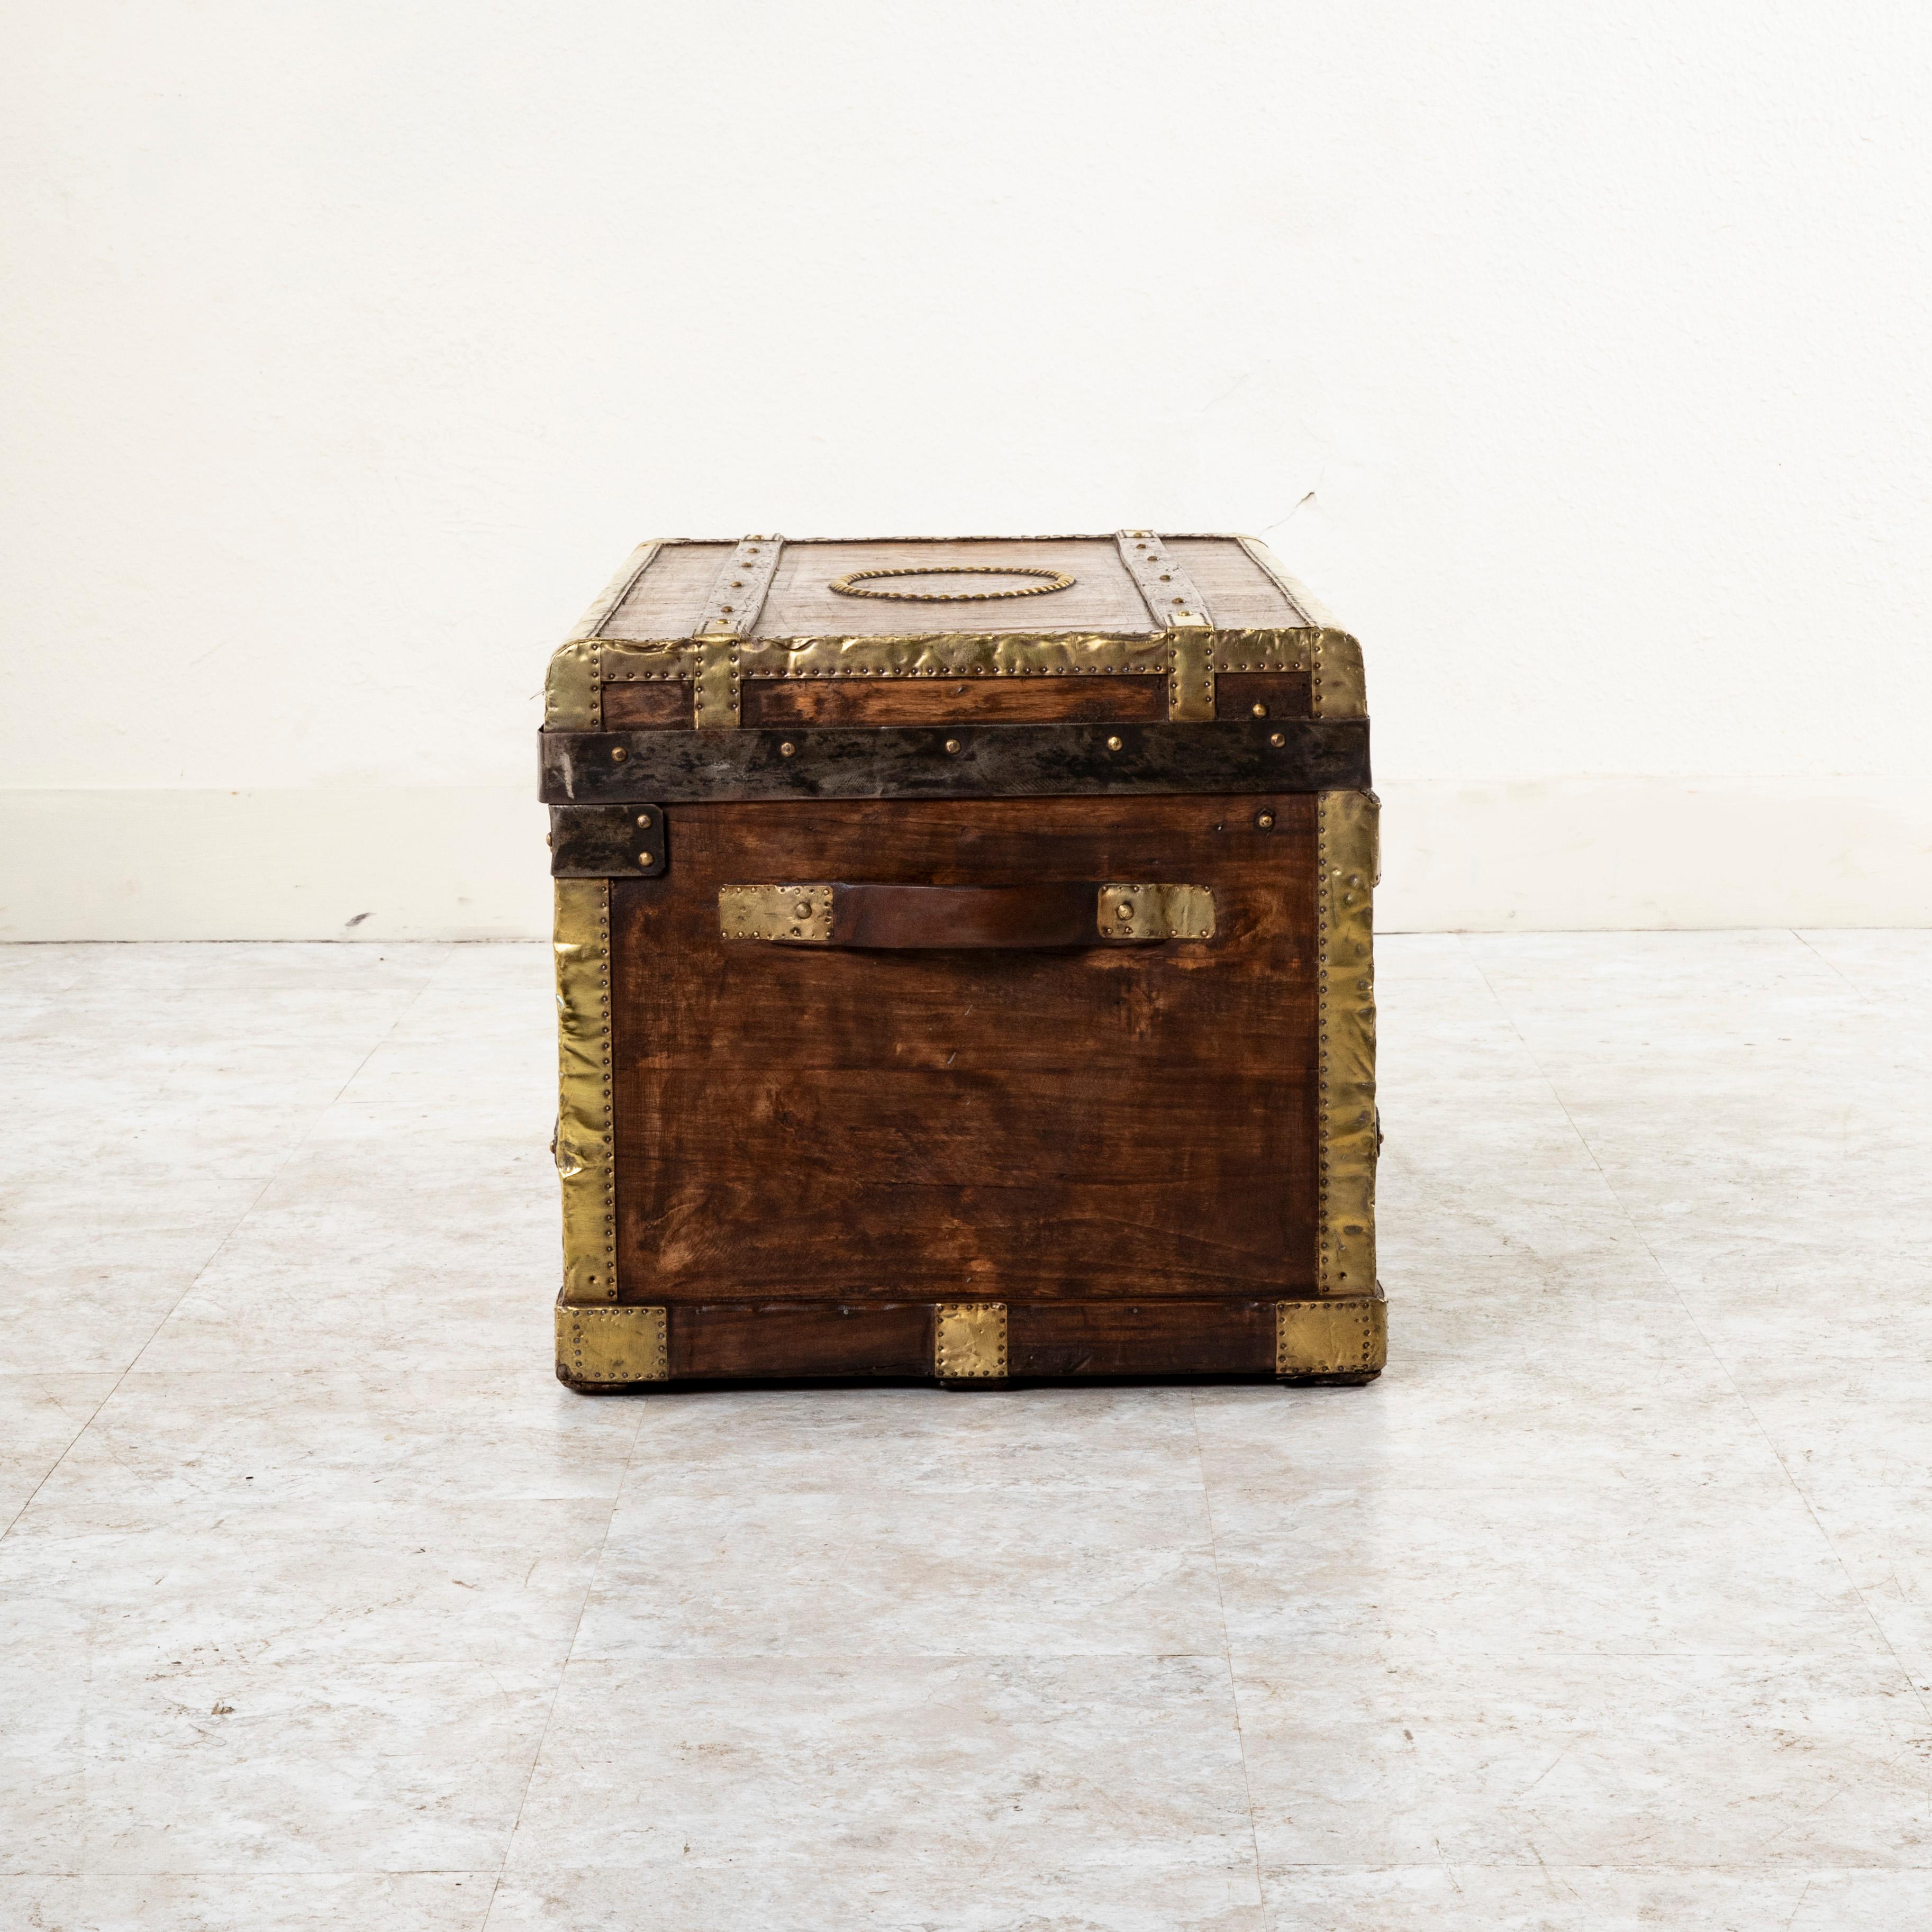 19th Century French Wooden Steam Trunk with Runners, Brass, Iron, Leather Details, circa 1880 For Sale